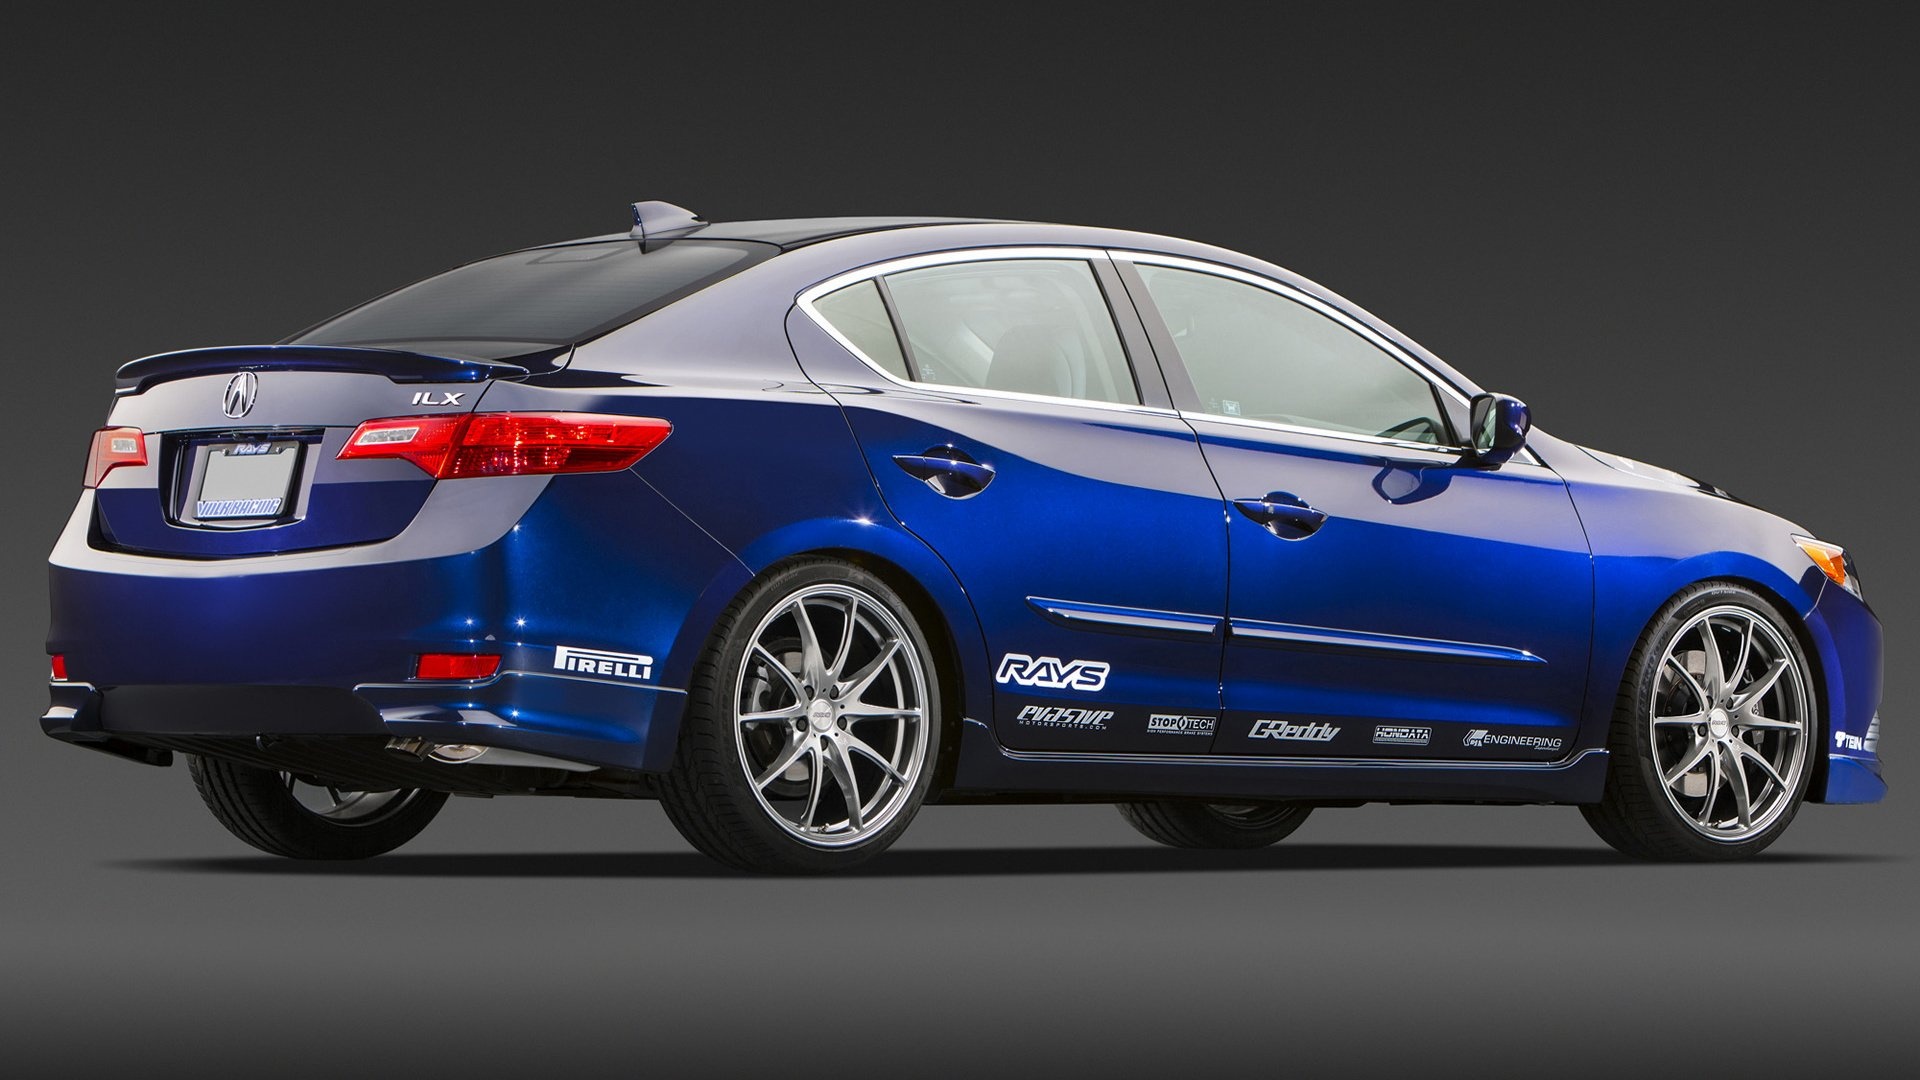 Acura ILX, Street build wallpapers, HD wallpapers, Car backgrounds, 1920x1080 Full HD Desktop